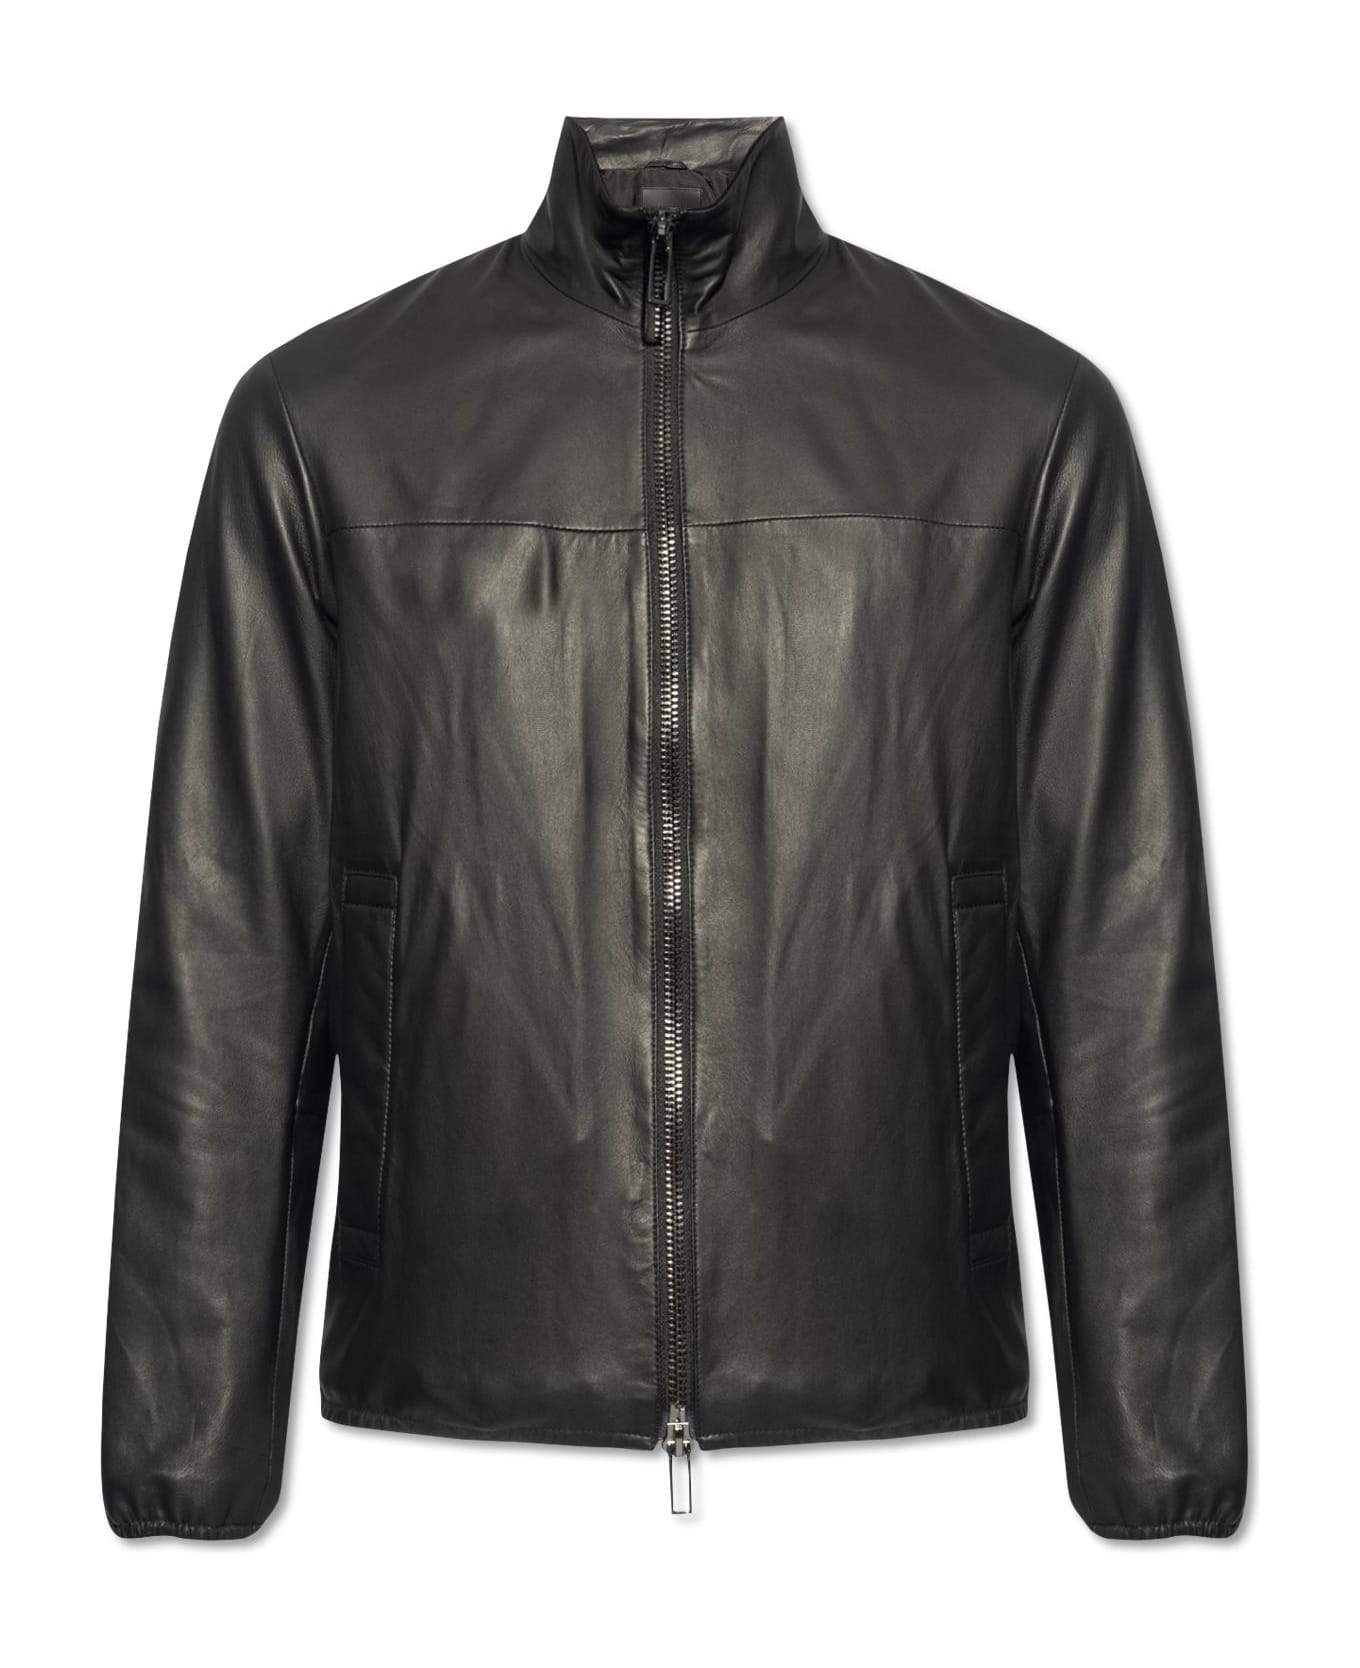 Emporio Armani Leather Jacket With Stand-up Collar - Black